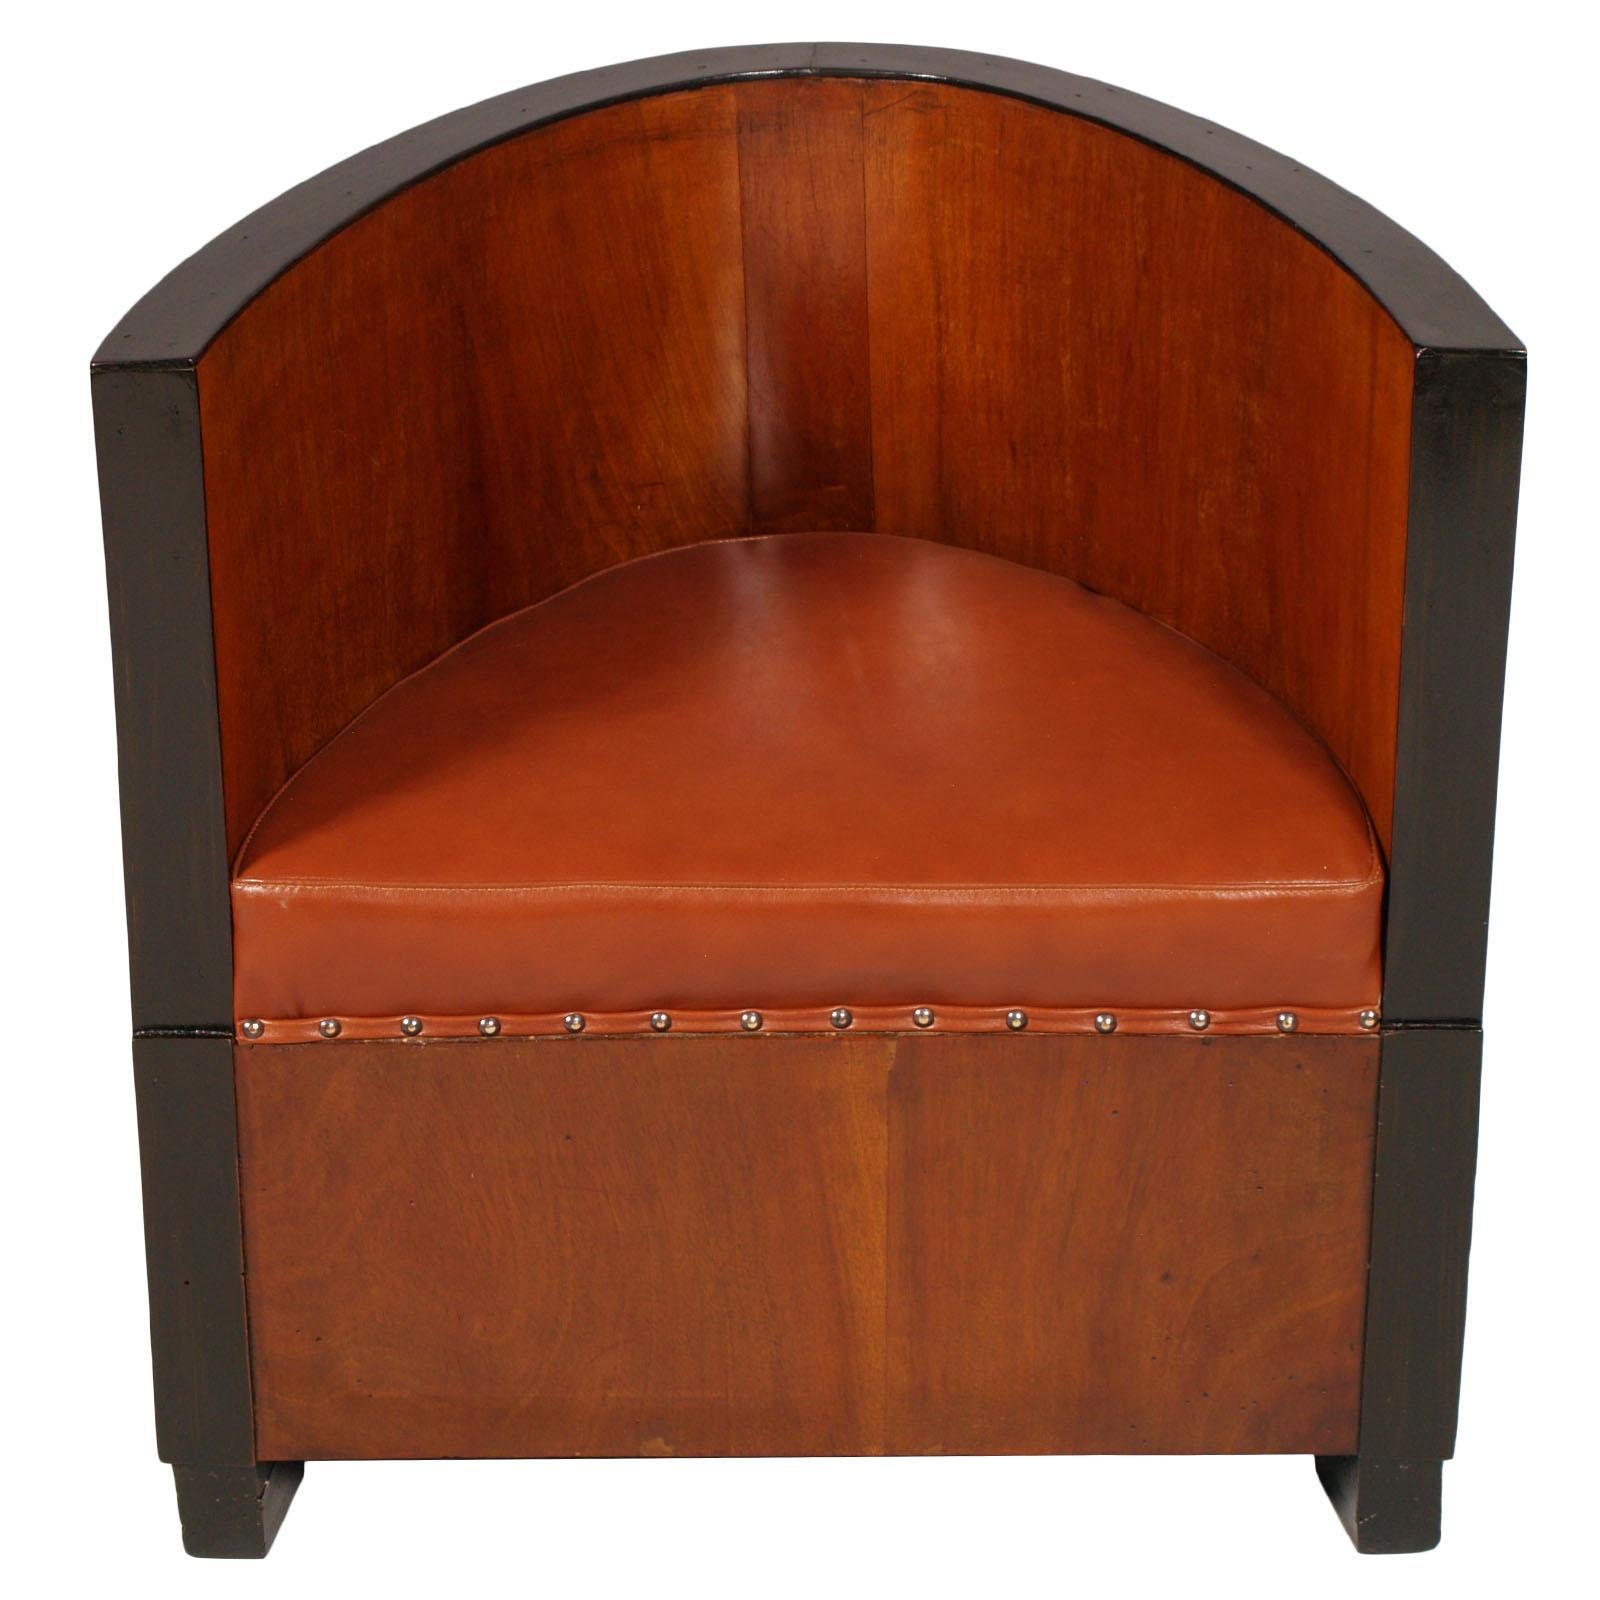 1920s Armchair by Gino Maggioni for Atelier Borsani Varedo new leather upholstered in veneered walnut, wax polished. 

Measures cm: H 37/62 x W 62 x D 44.